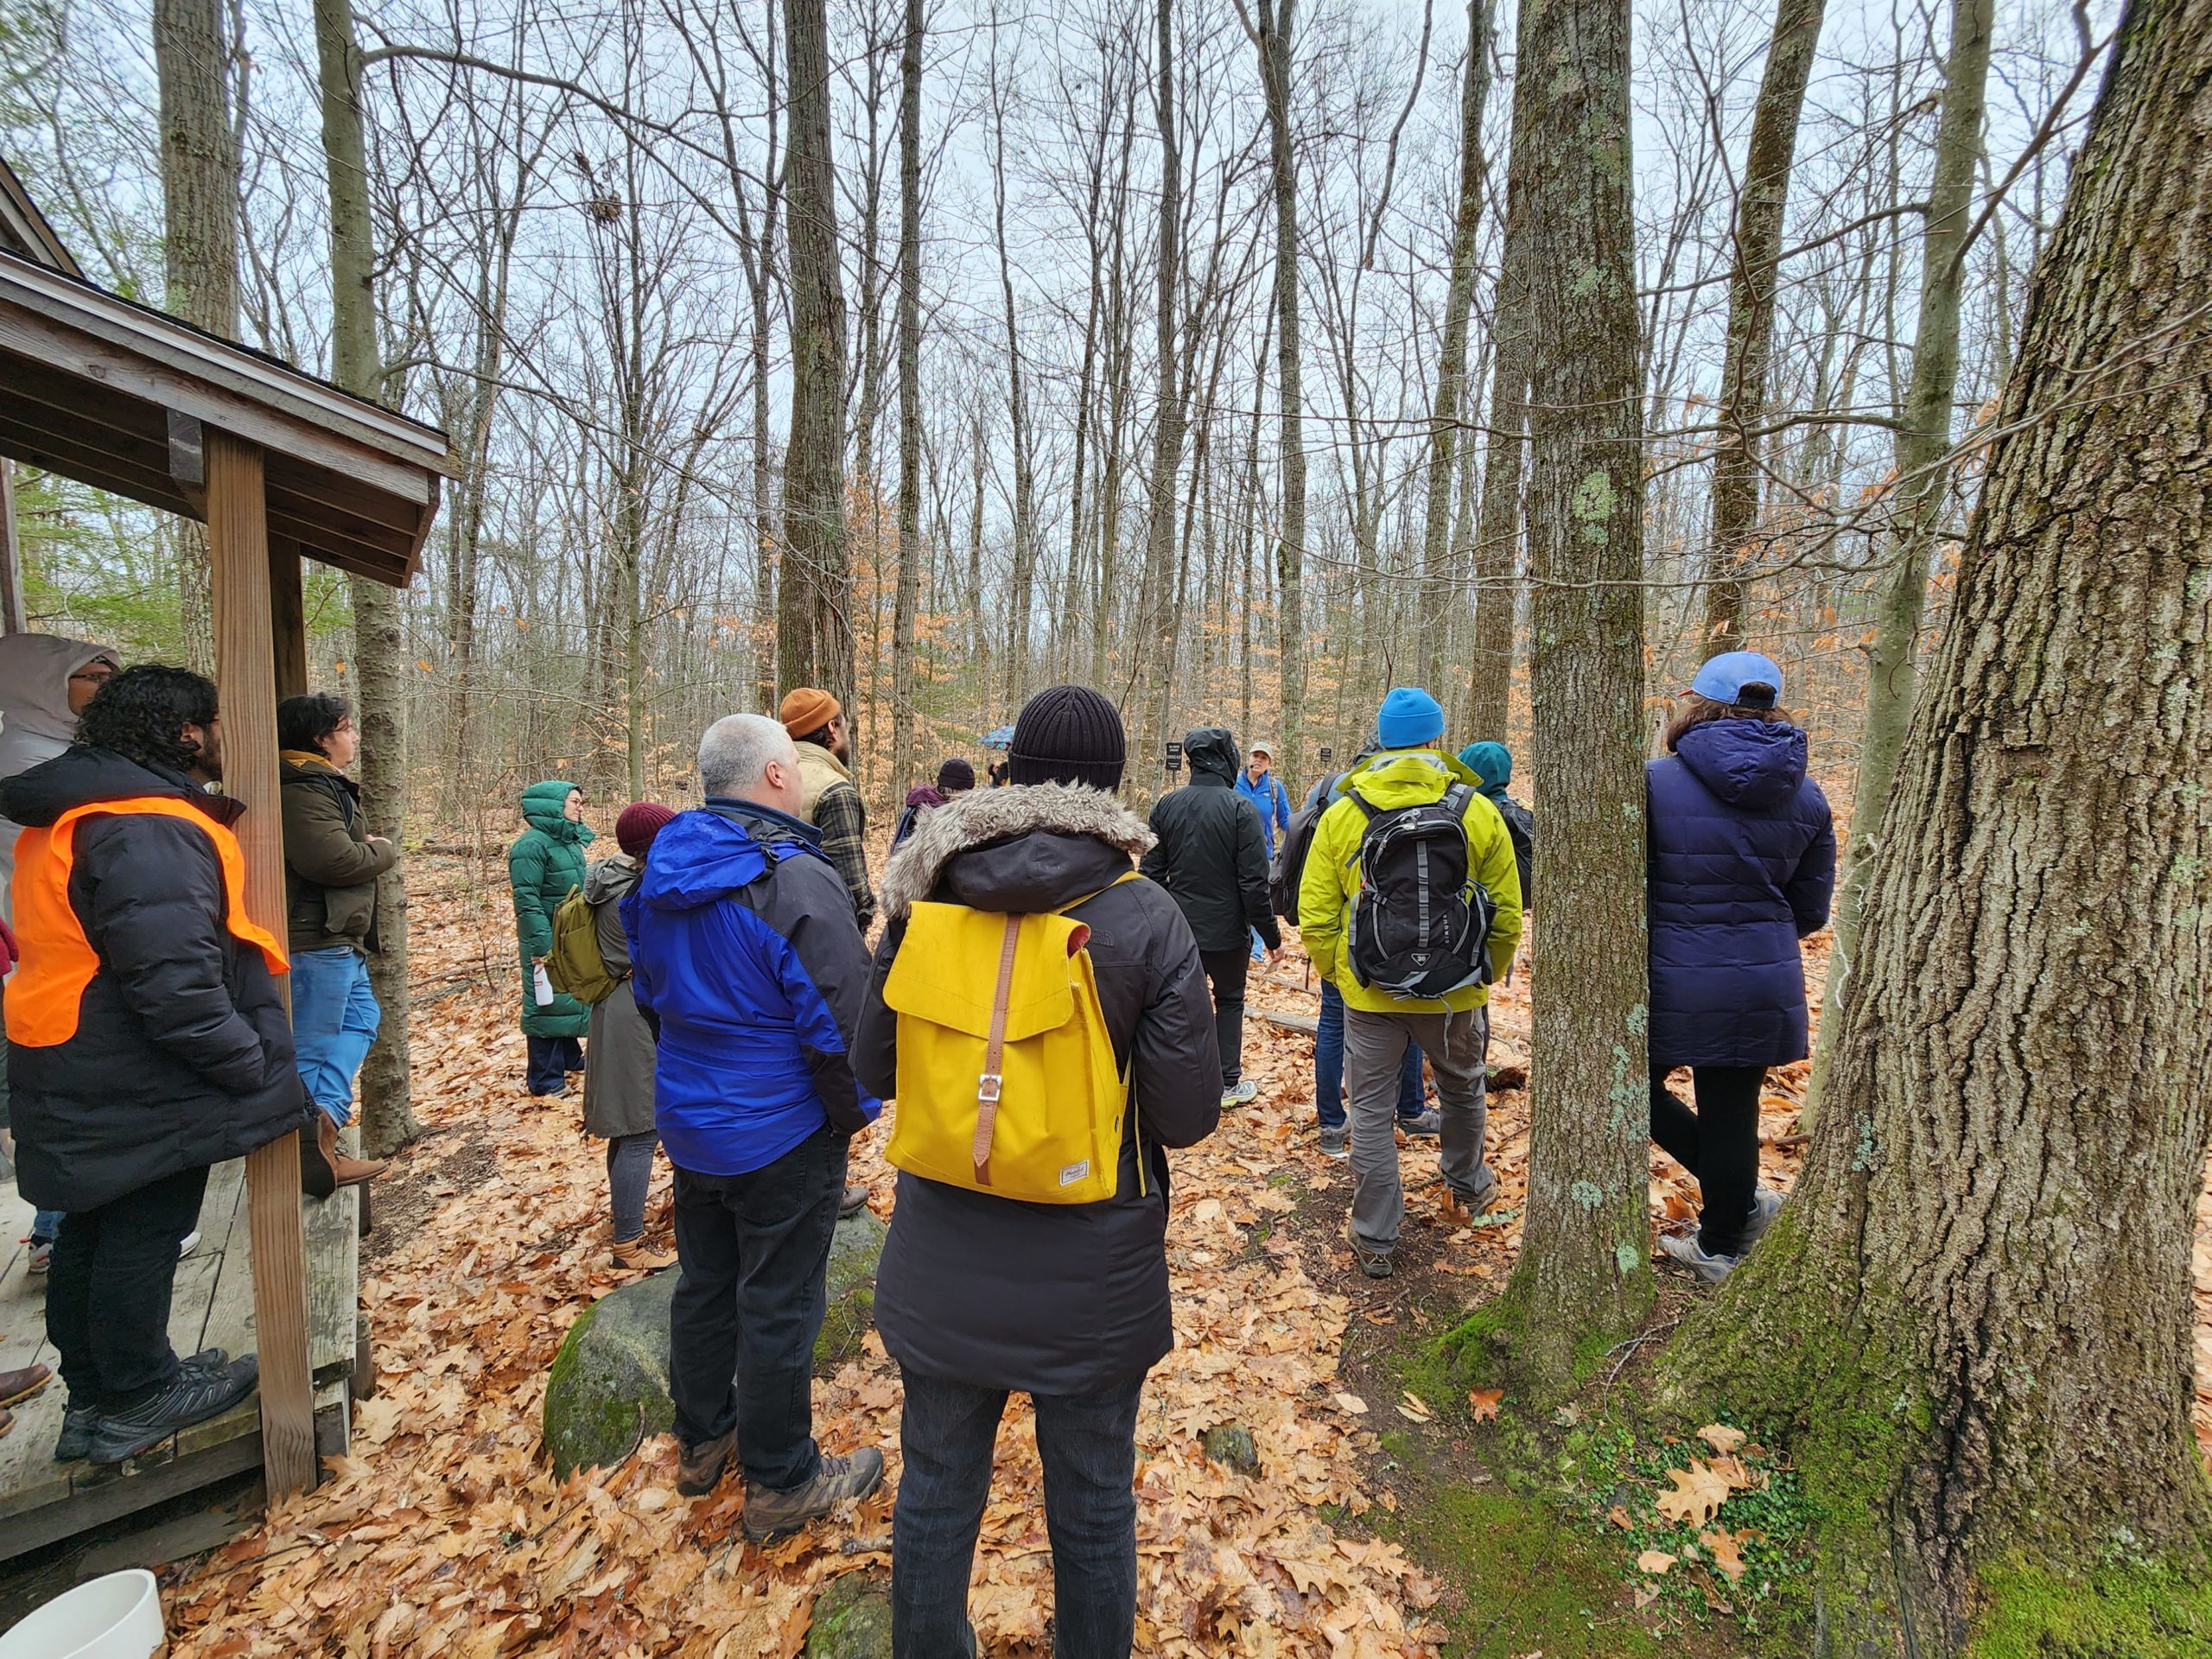 A group of 2023 Nieman Fellows and affiliates visit the Harvard Forest on Dec. 6, 2022.